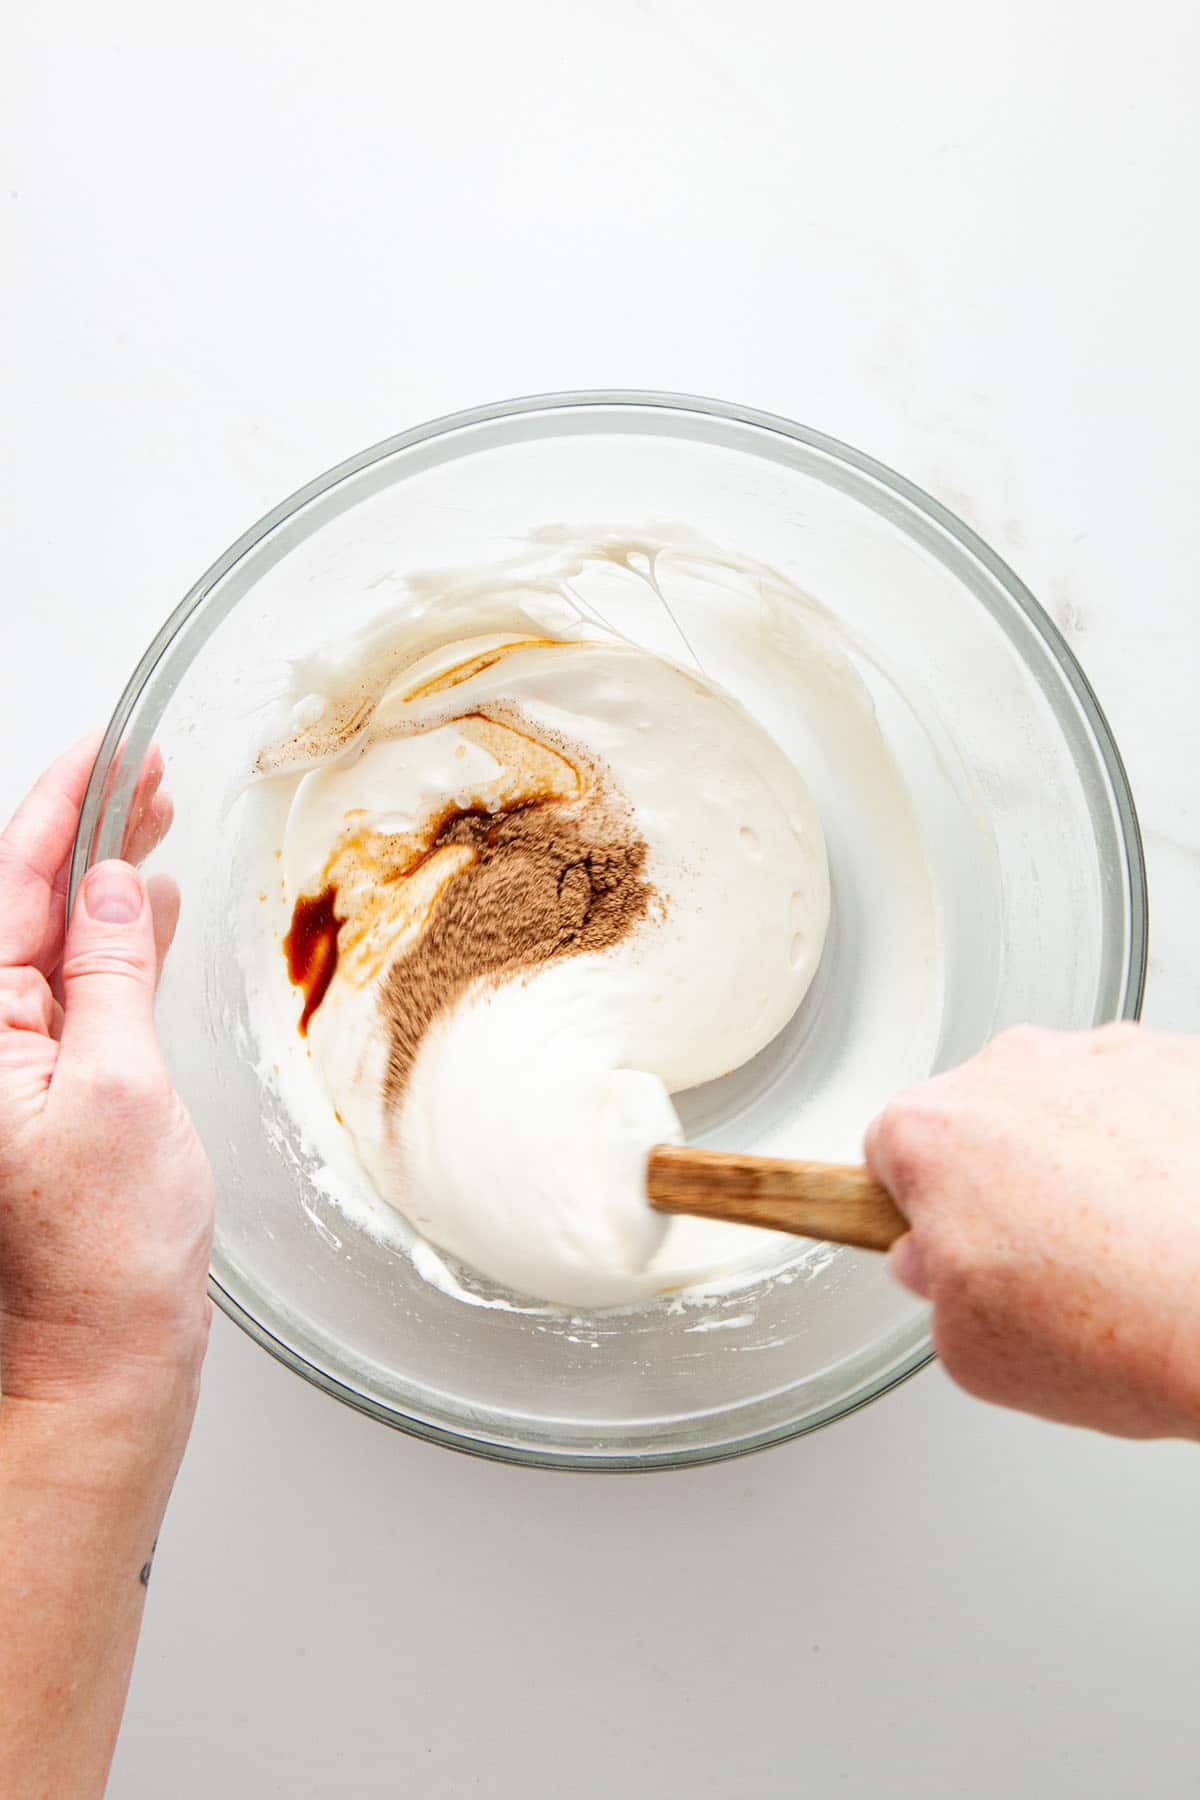 A hand mixing melted marshmallow, spices, and vanilla.